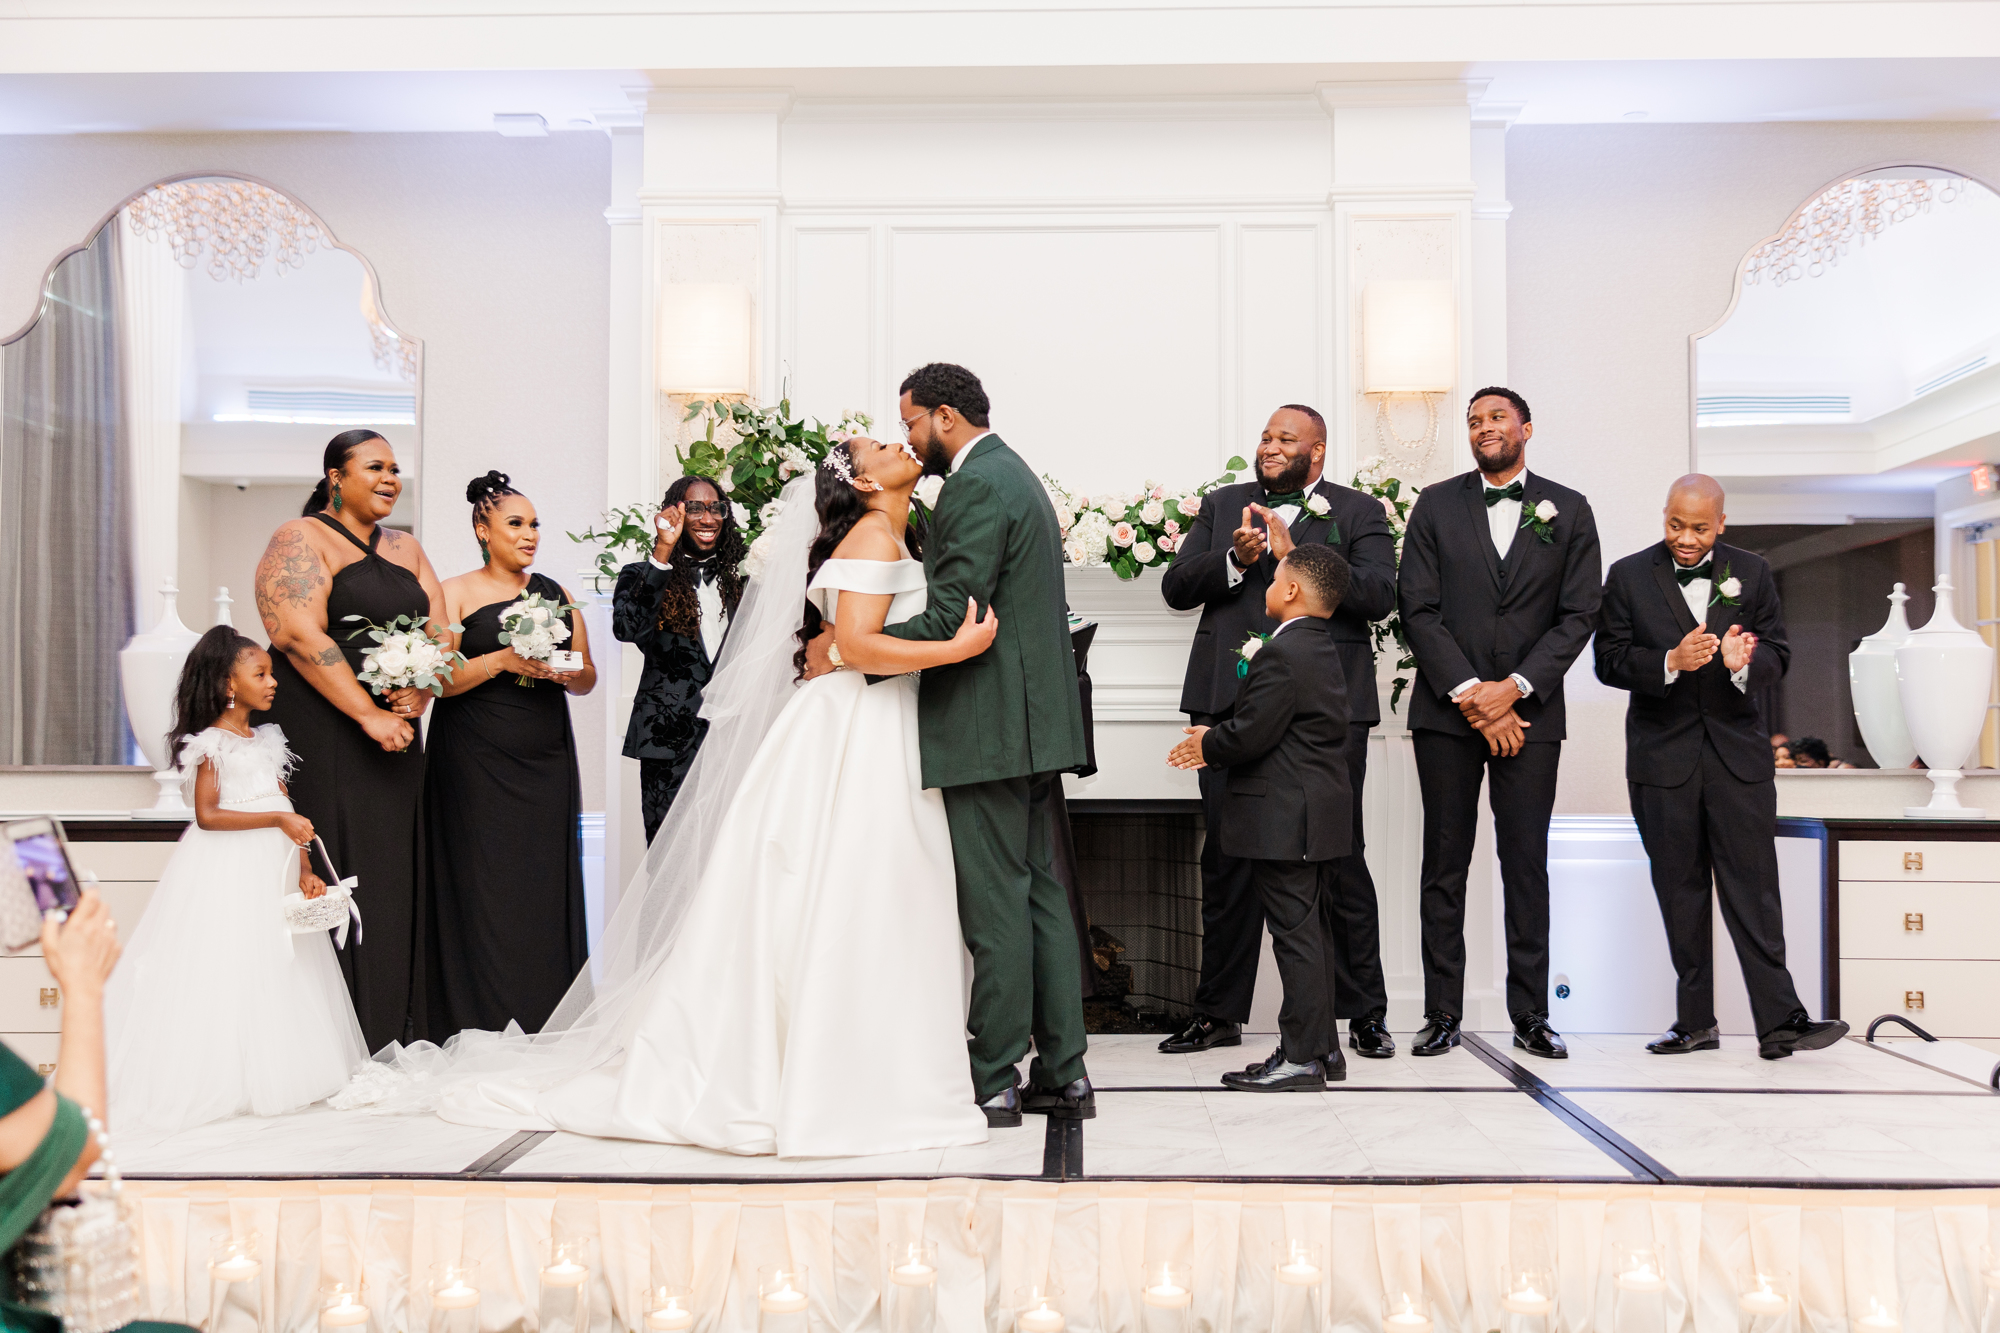 Intimate New Jersey Wedding Photos at Edgewood Country Club in Fall